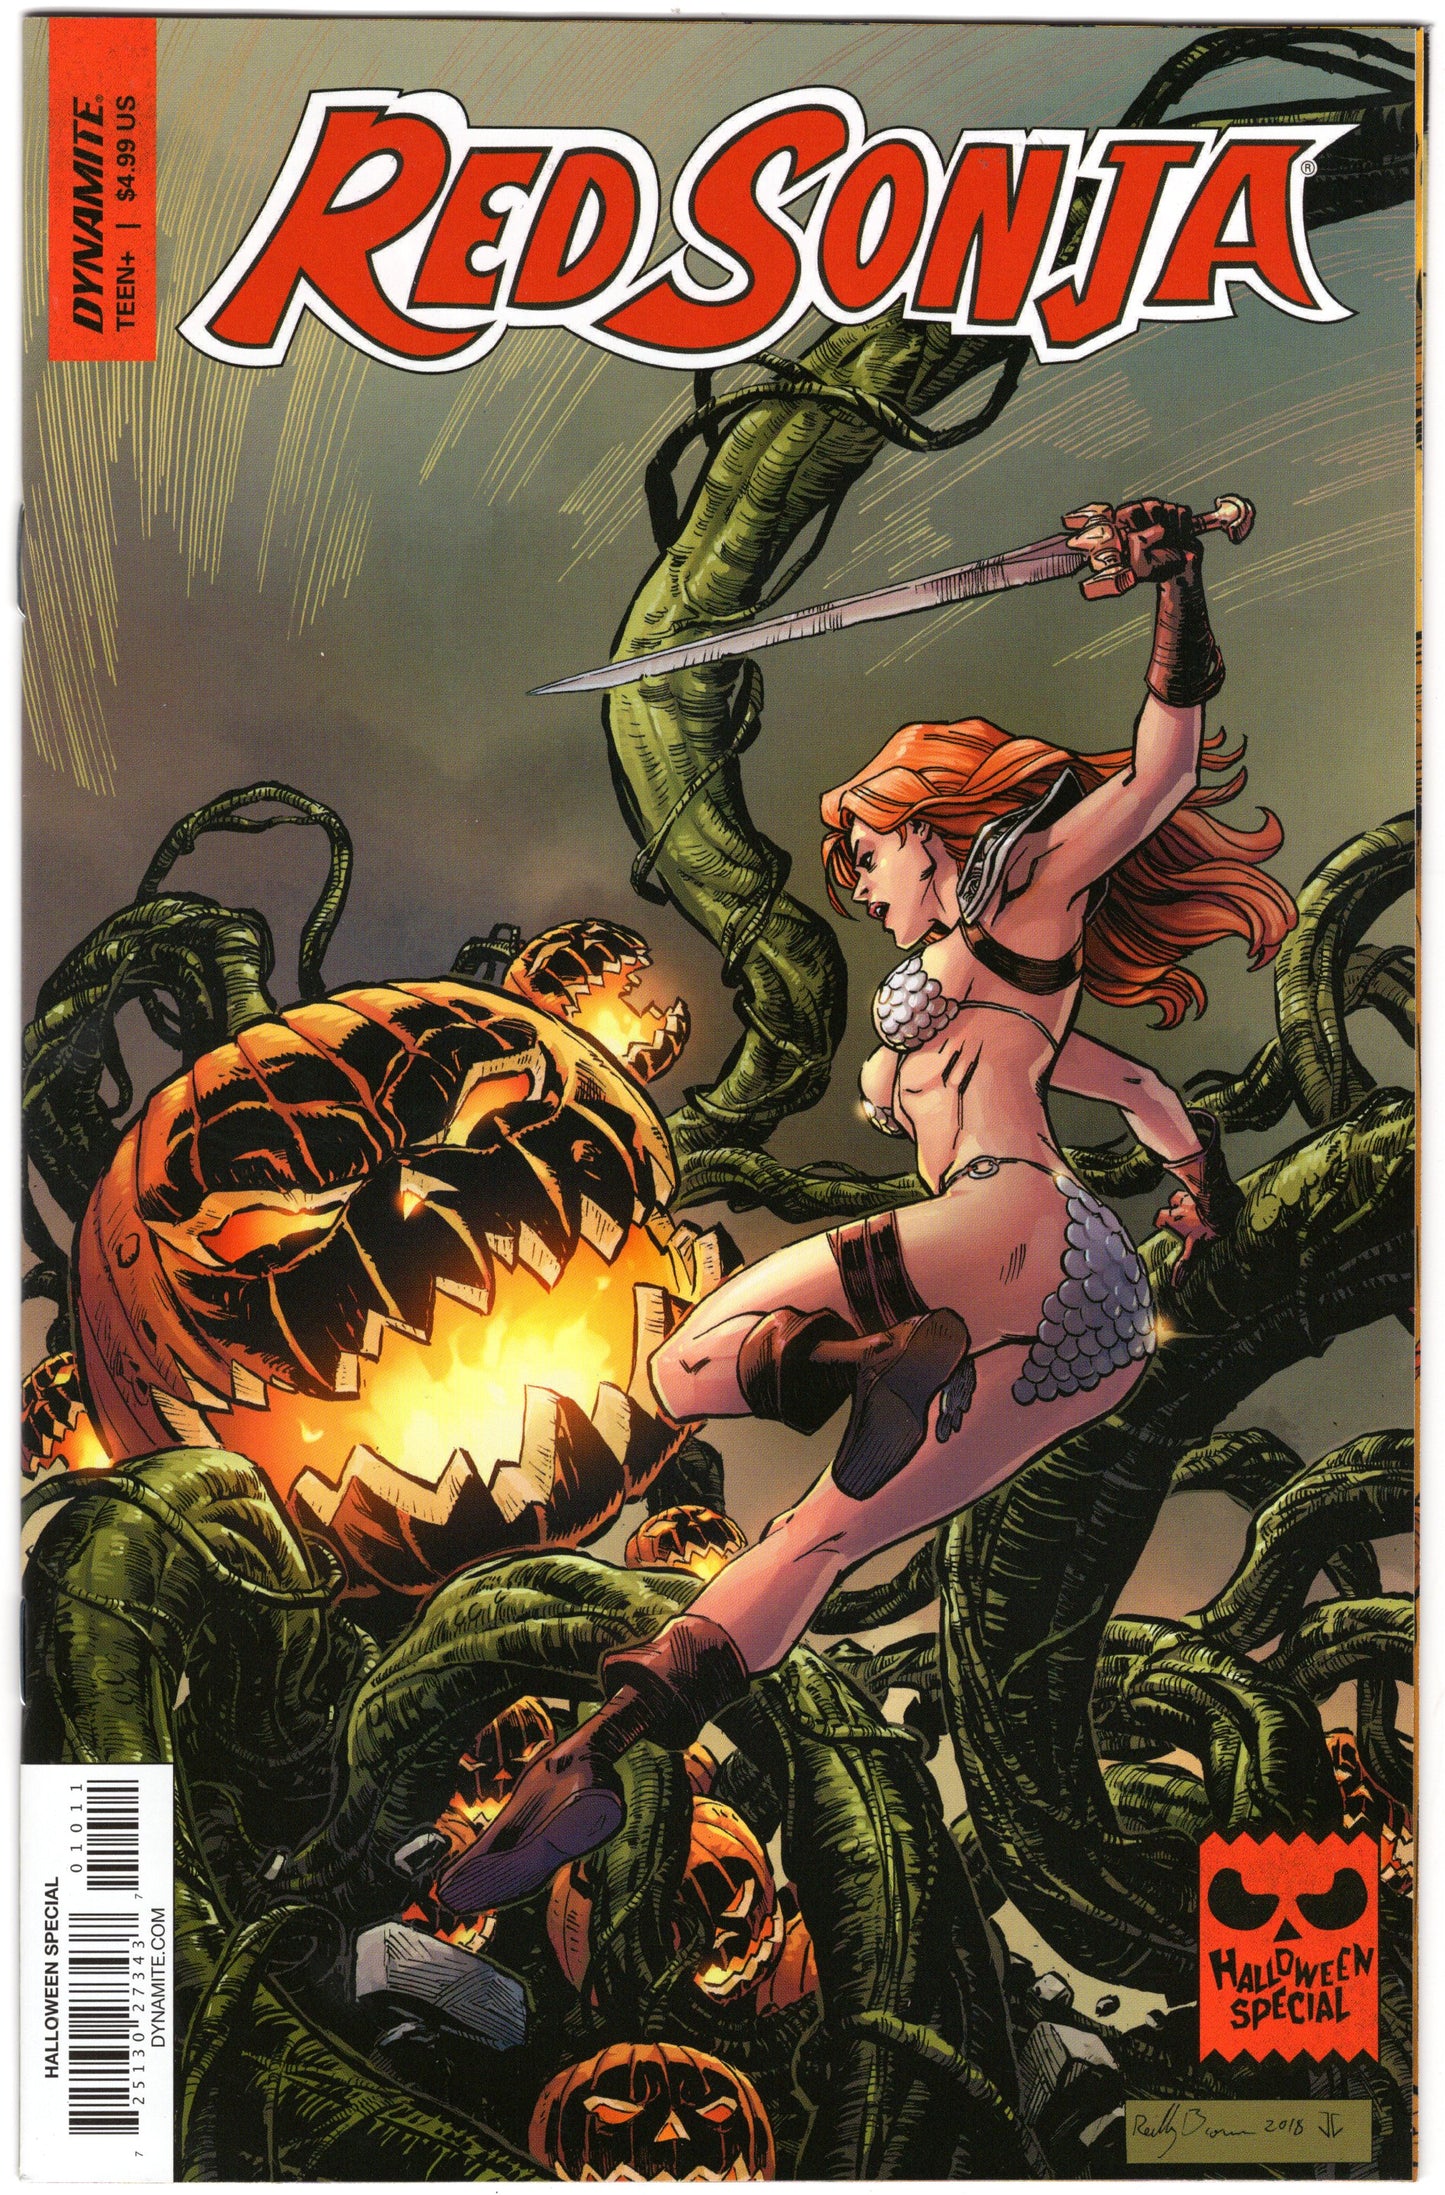 Red Sonja "Halloween Special" - Issue #0 (Oct. 2018 - Dynamite Entertainment) VF/NM